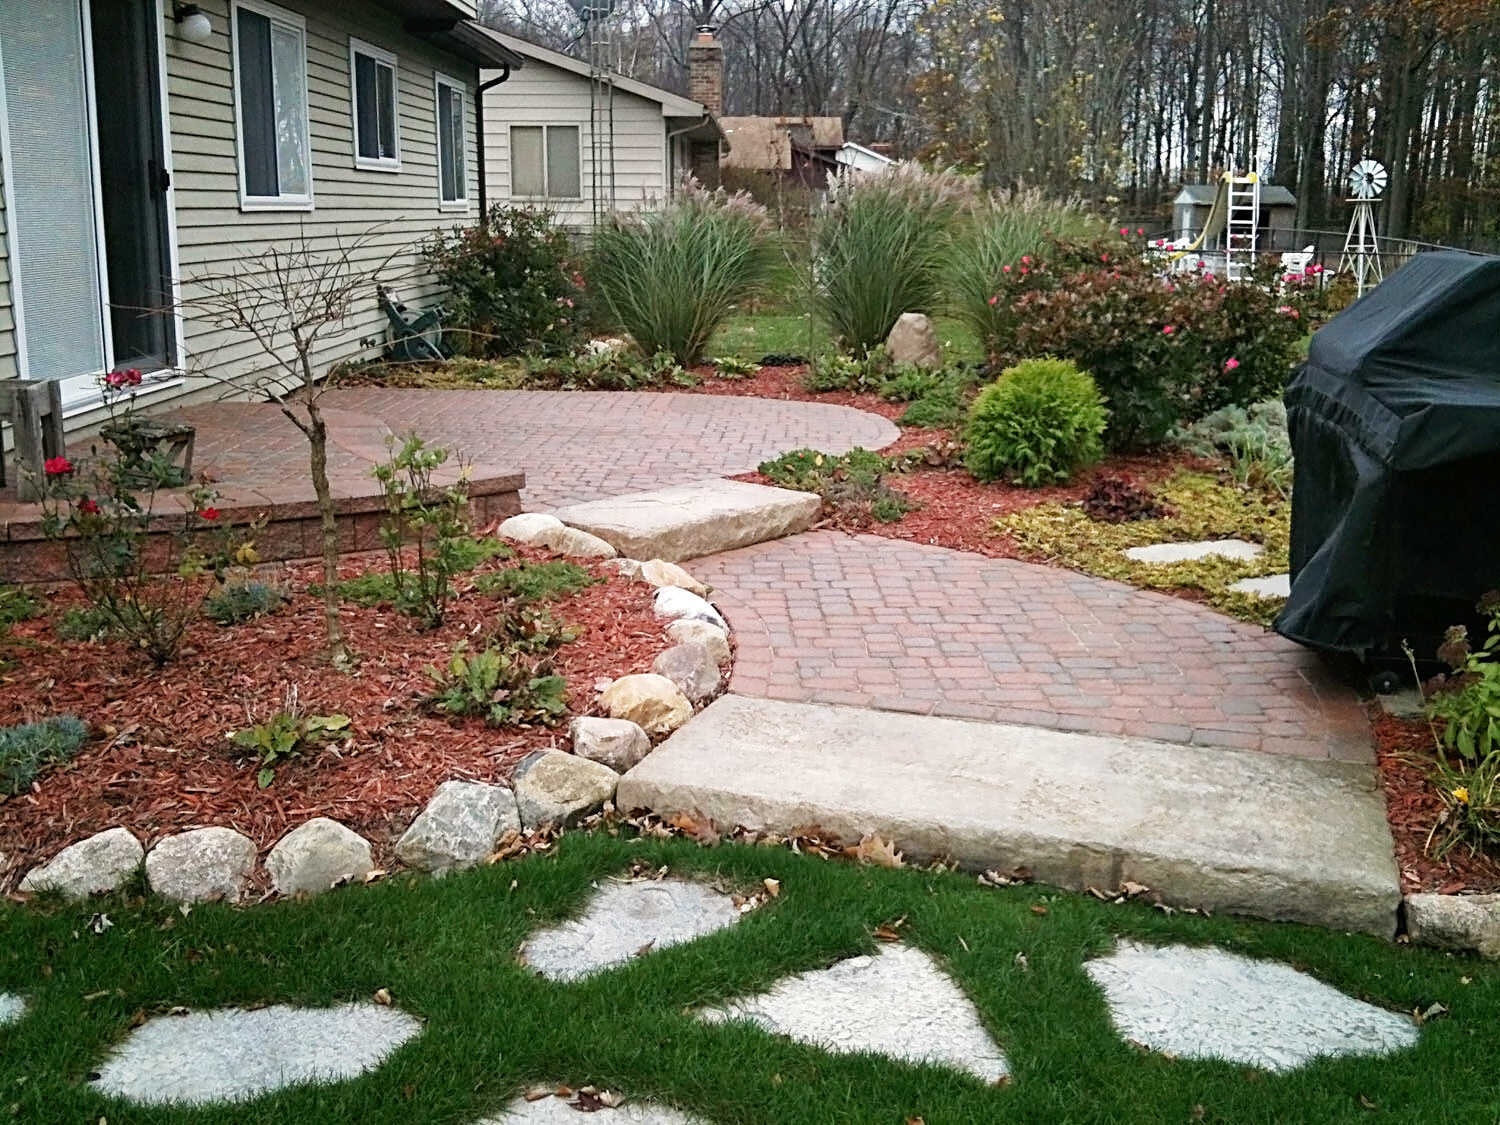  tiered patio with pavers and gardens with shrubs and trees | Flint Michigan landscapers H&amp;M Landscaping 